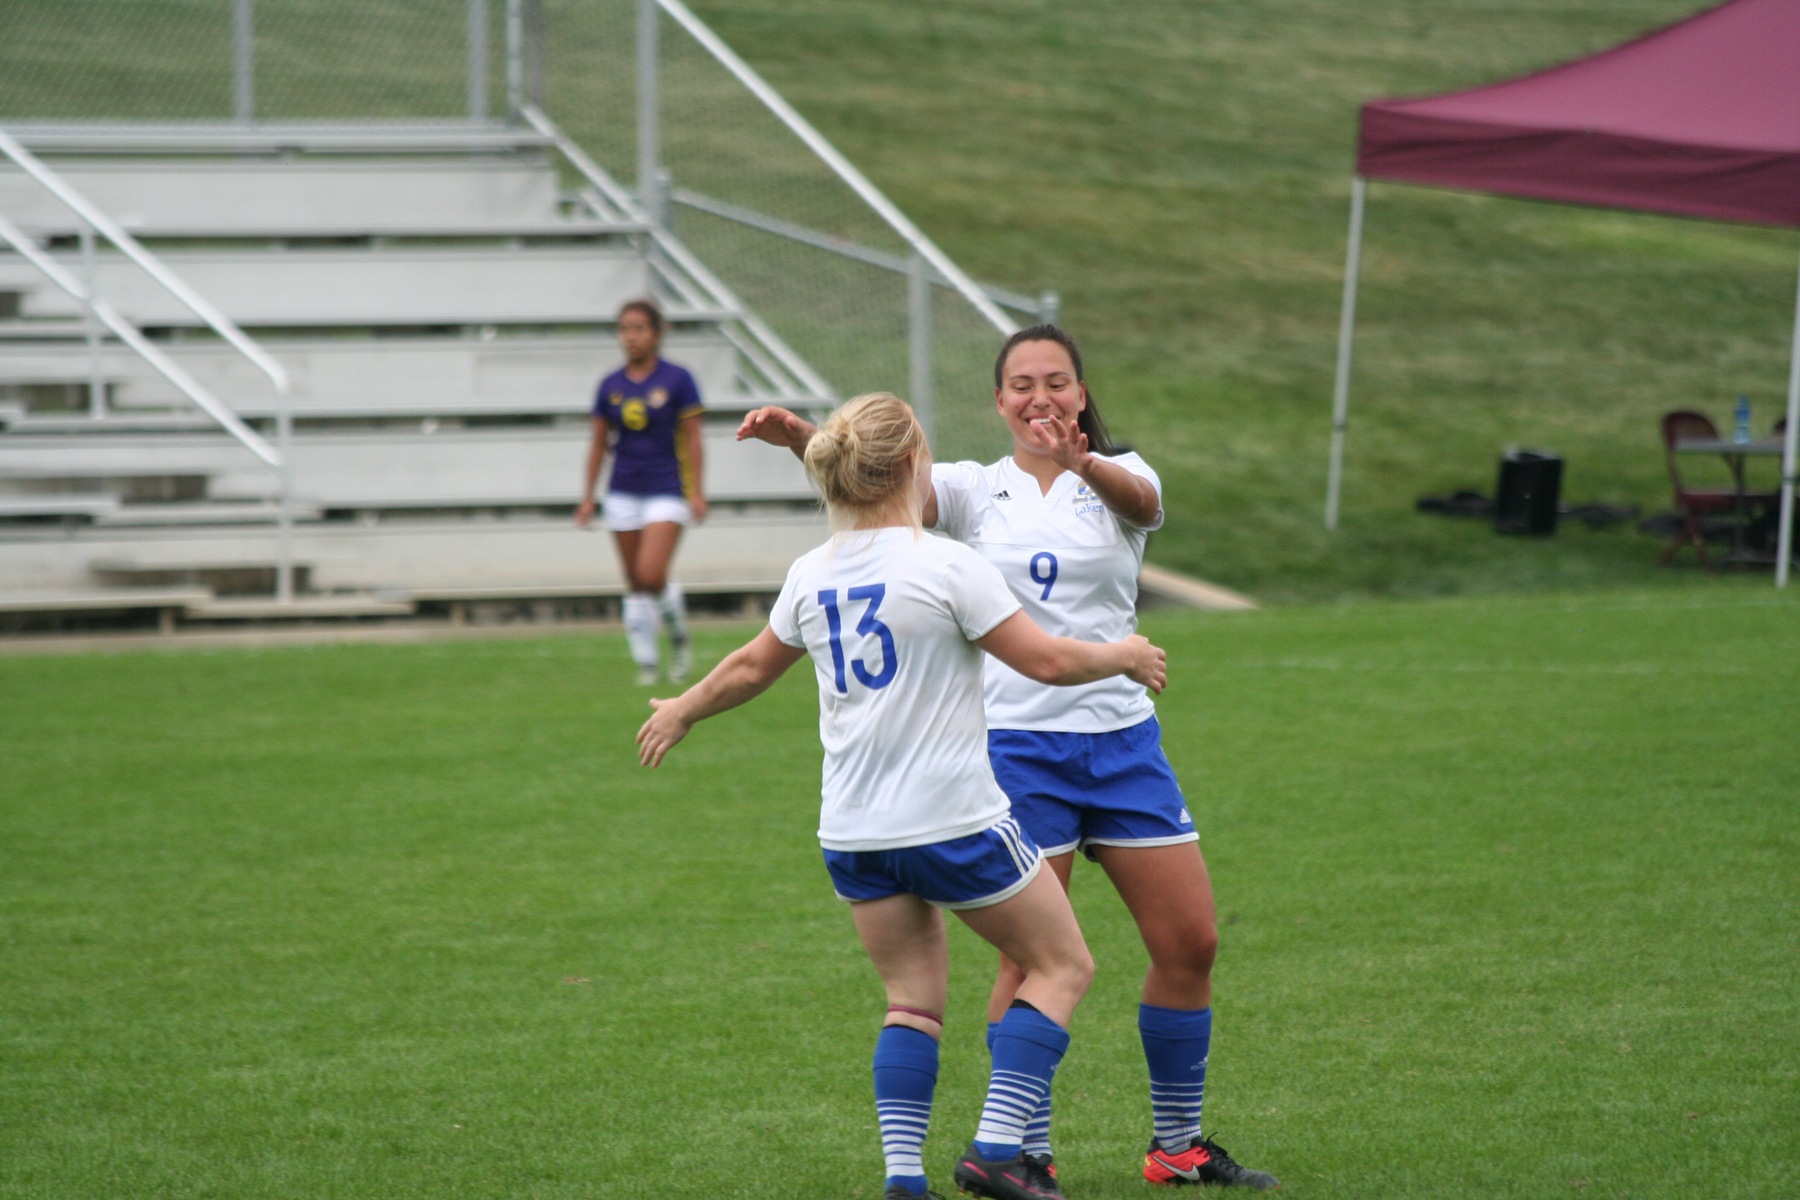 Sophomore's Maddy Duncan and Tessa Calabria celebrating after a goal.